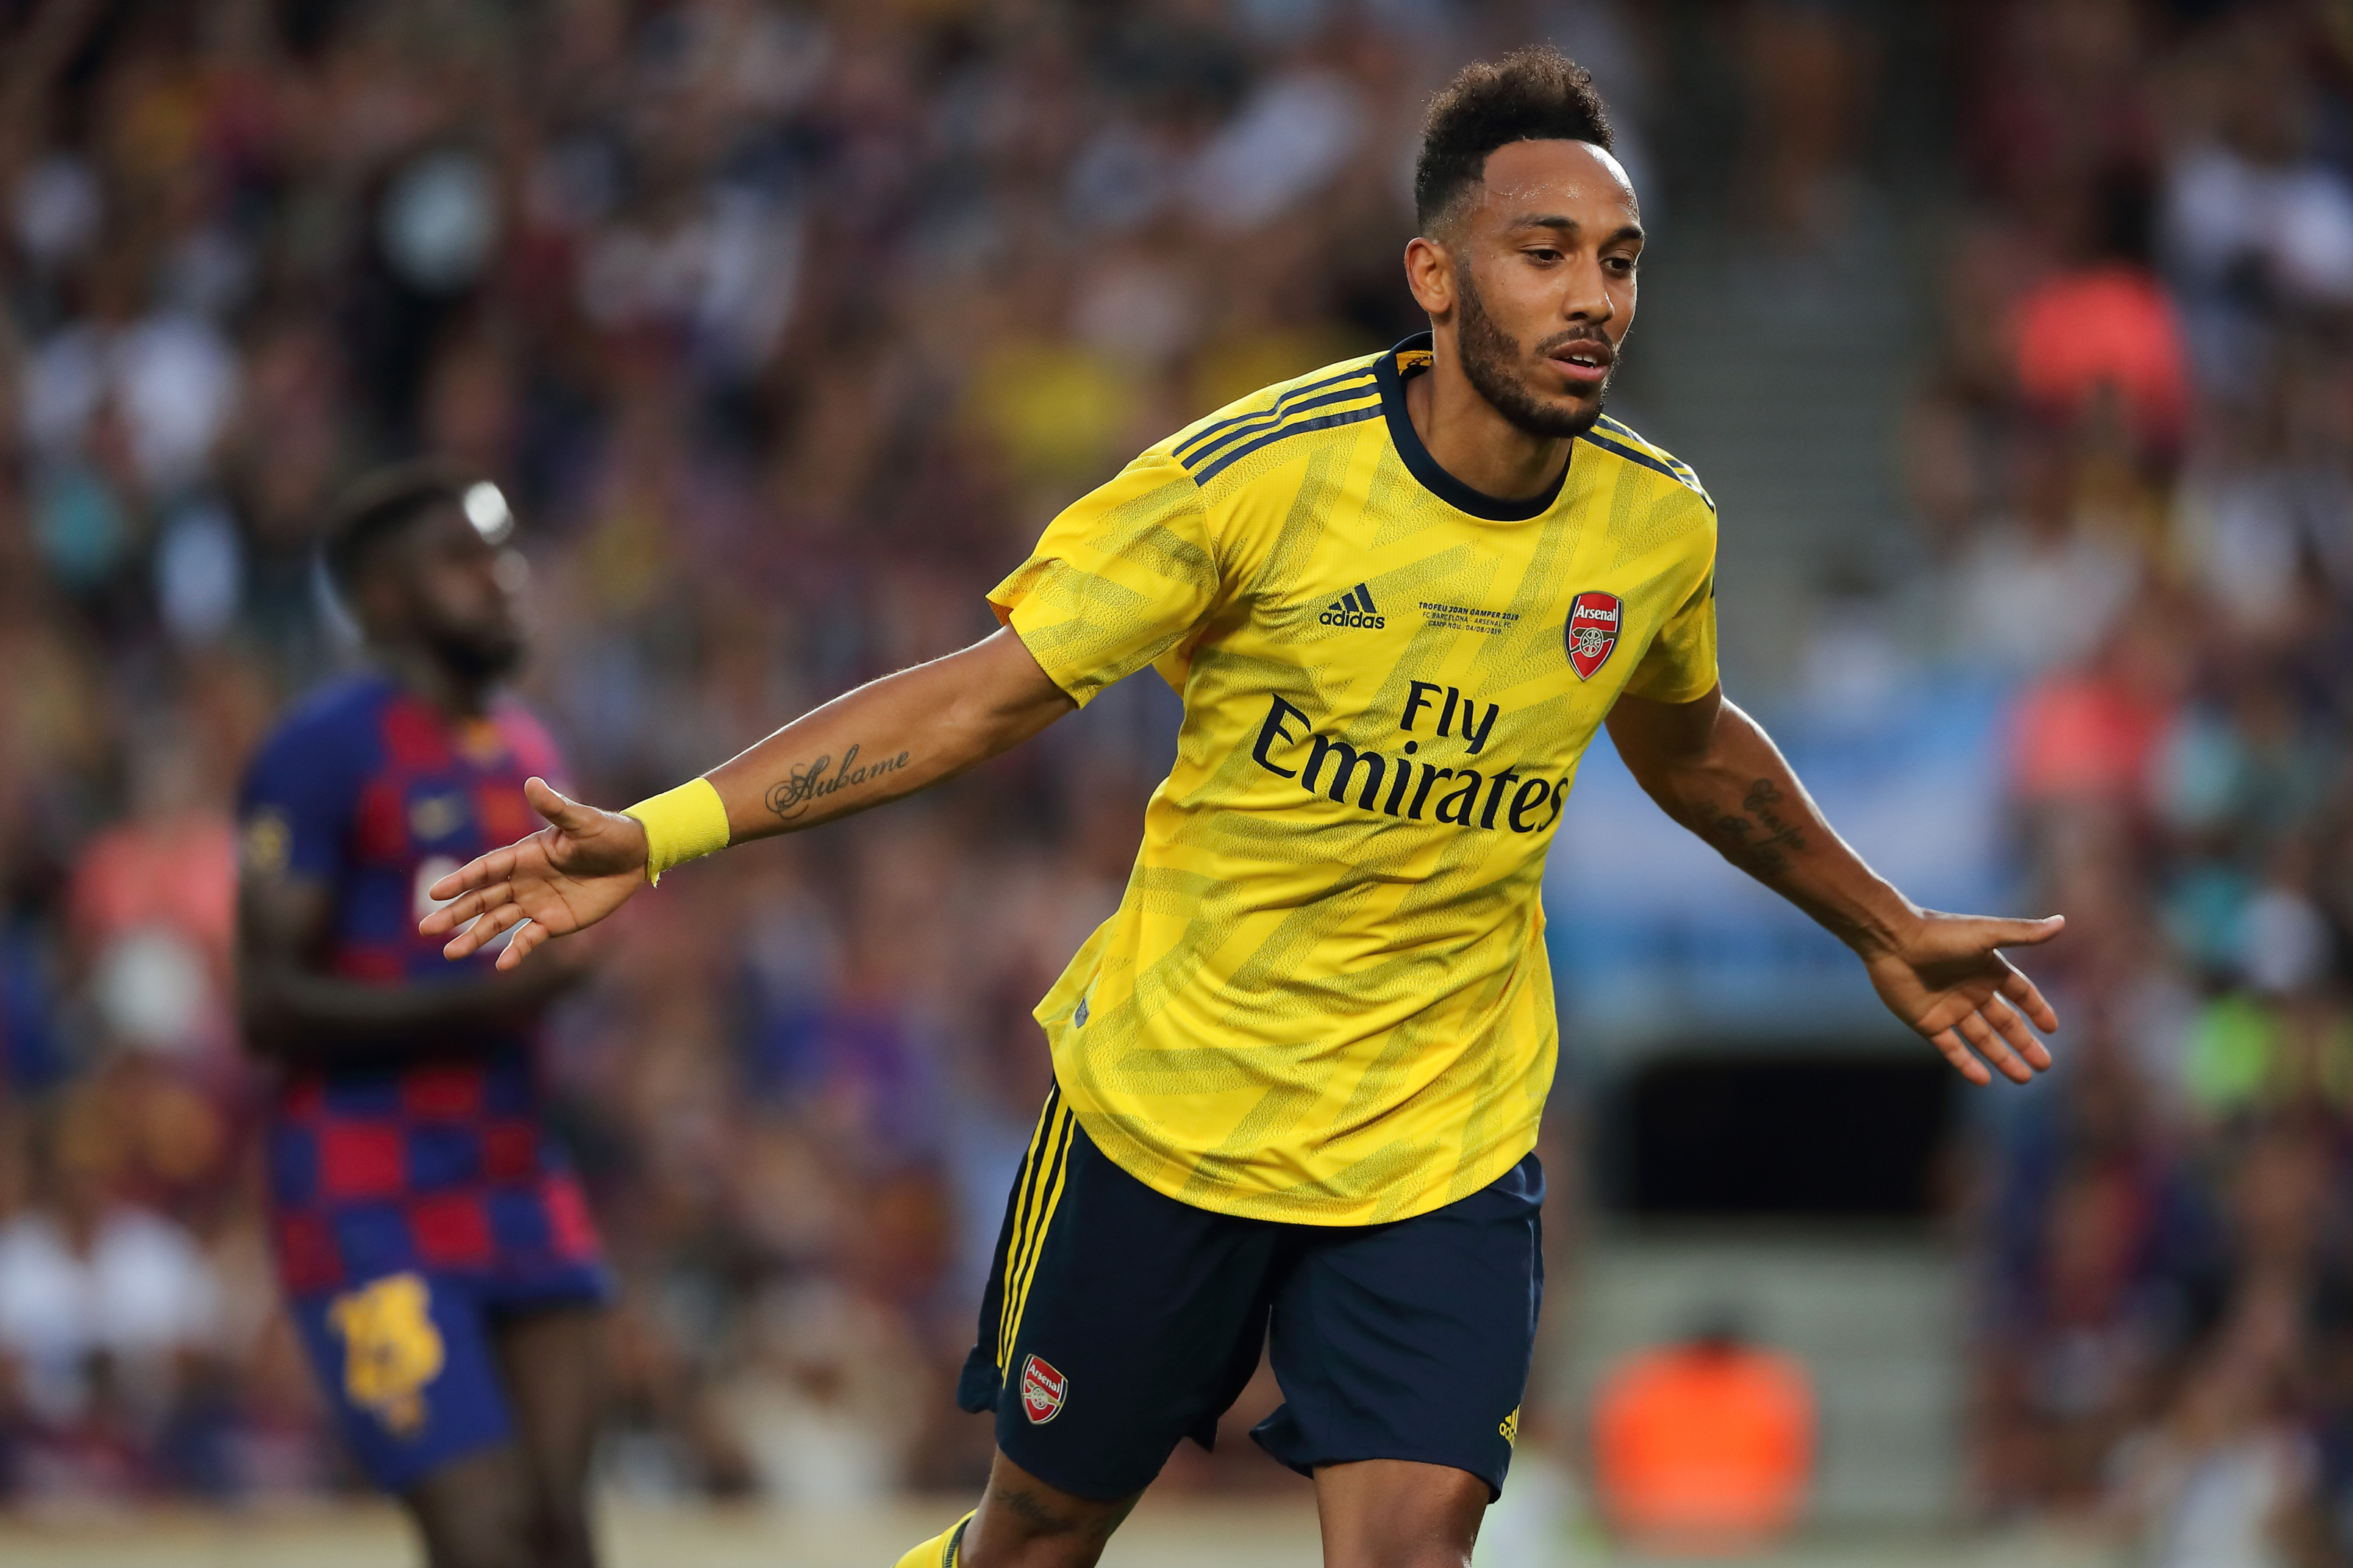 The reasons Pierre-Emerick Aubameyang could return to Barcelona